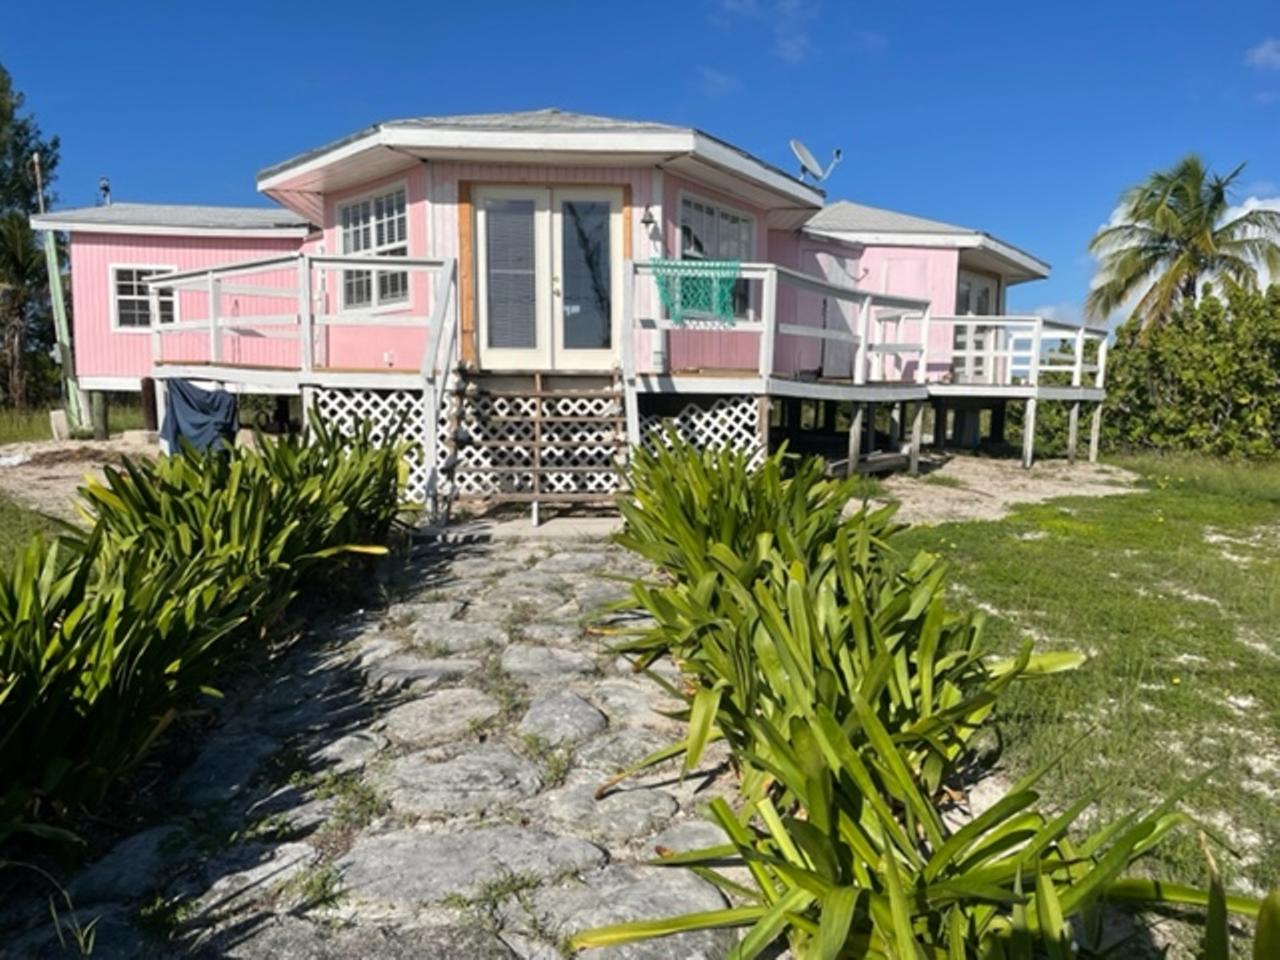 OCTAGON HOUSE, RUM CAY